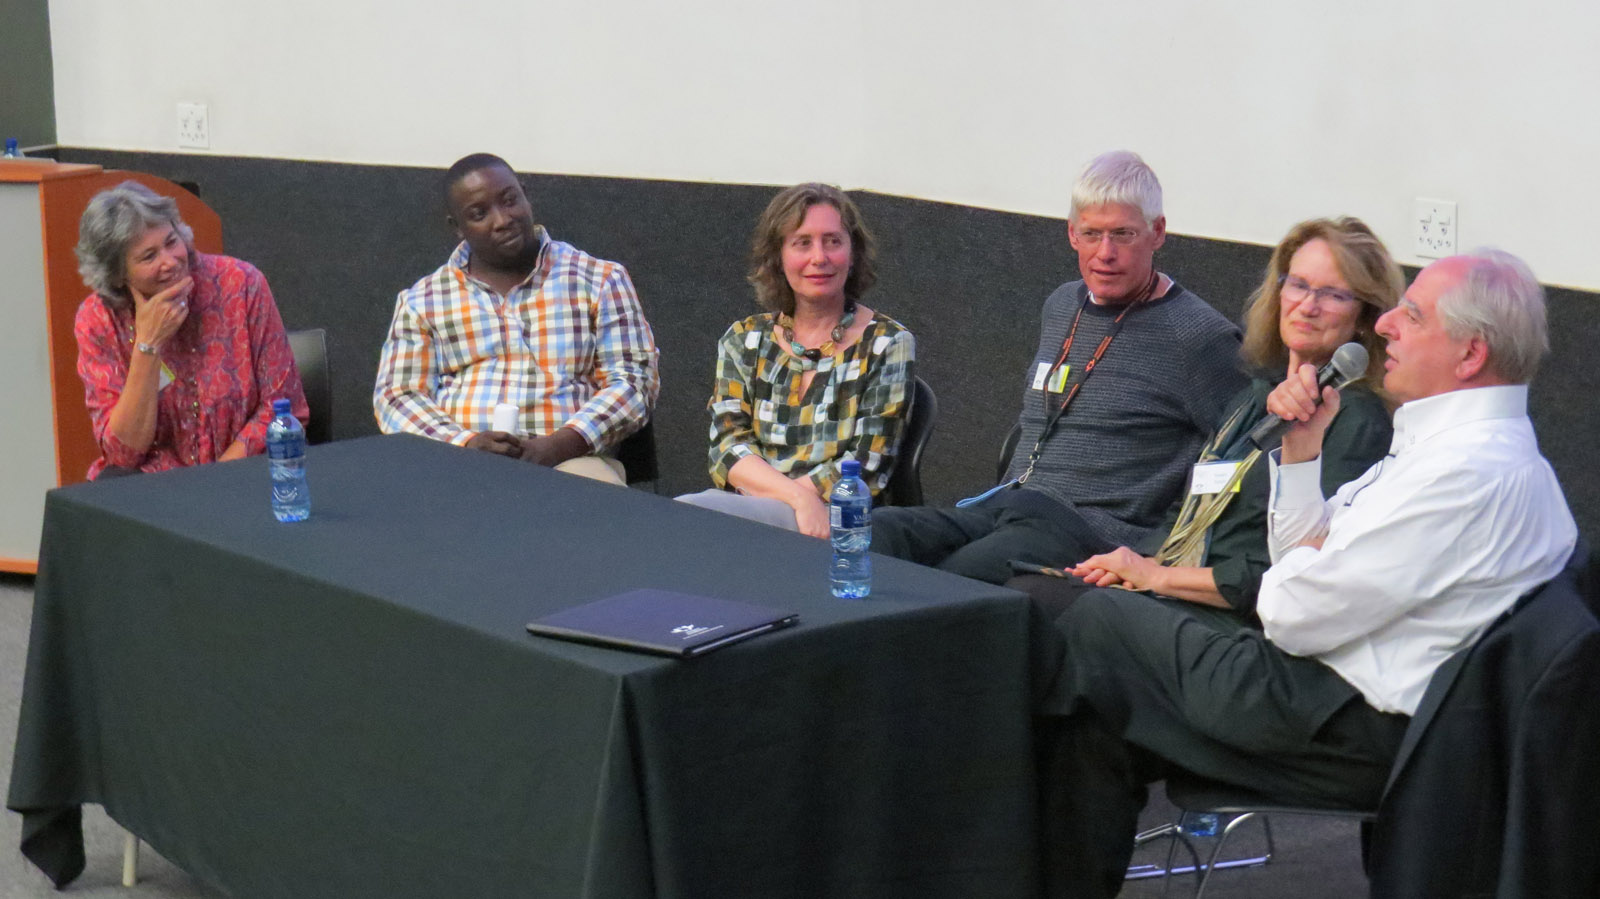 Click the image for a view of: Roundtable. A discussion of South African practitioners and studios working across disciplines. Kim Berman (chair) - discussants: Nathi Ndladla, Eliza Kentridge, Mark Attwood, Susan Gosin and William Kentridge. Friday 24 March